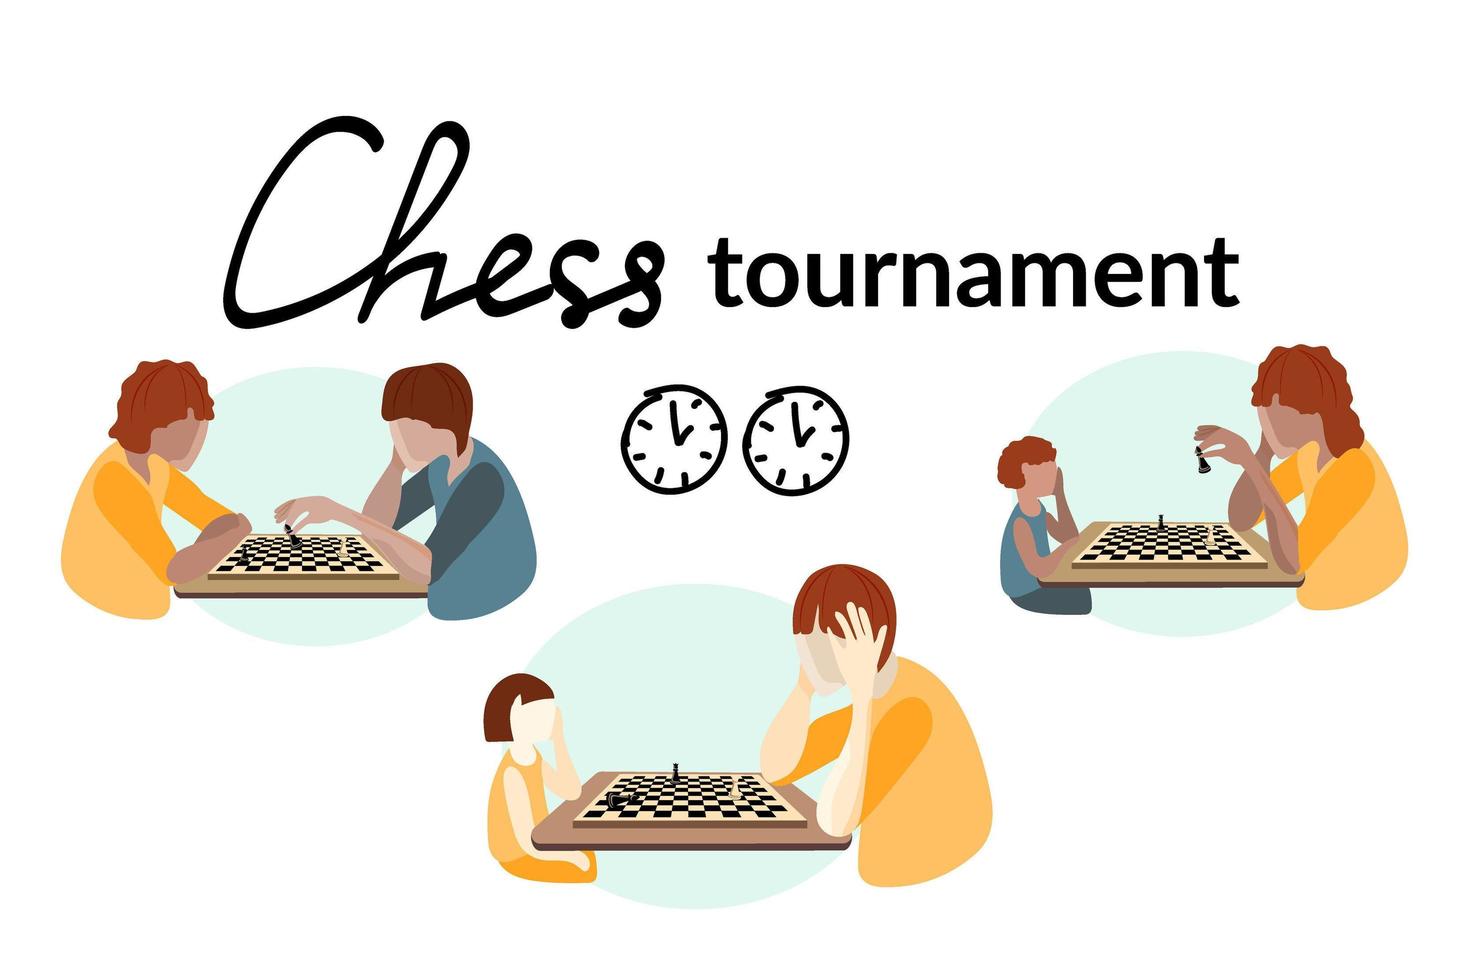 The concept of a chess tournament. People of different ages and races play chess. Chessboard and the pieces on it. Vector in flat style.